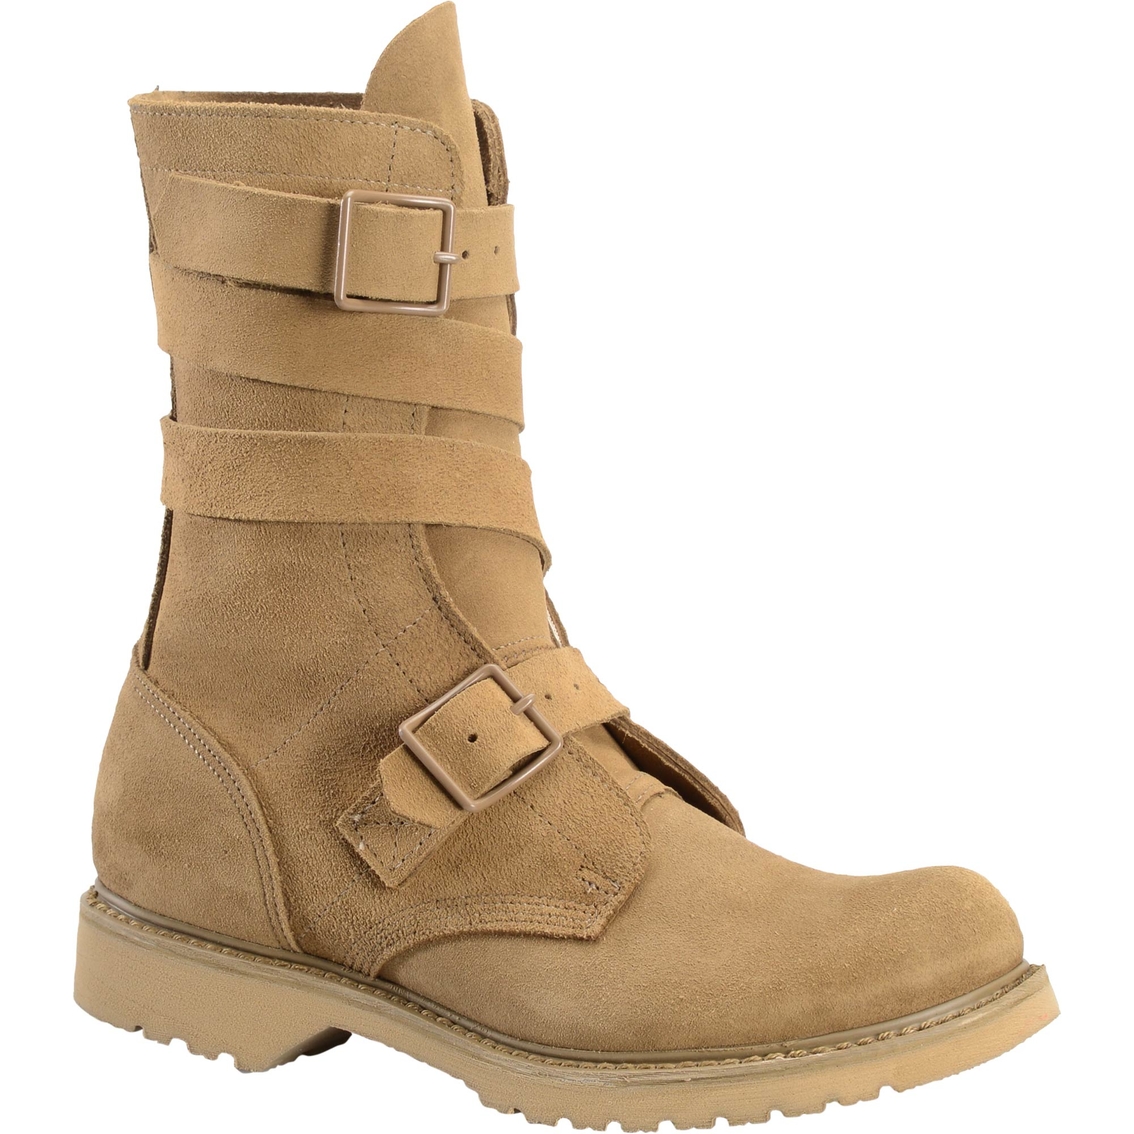 Army Tanker Boots - Army Military